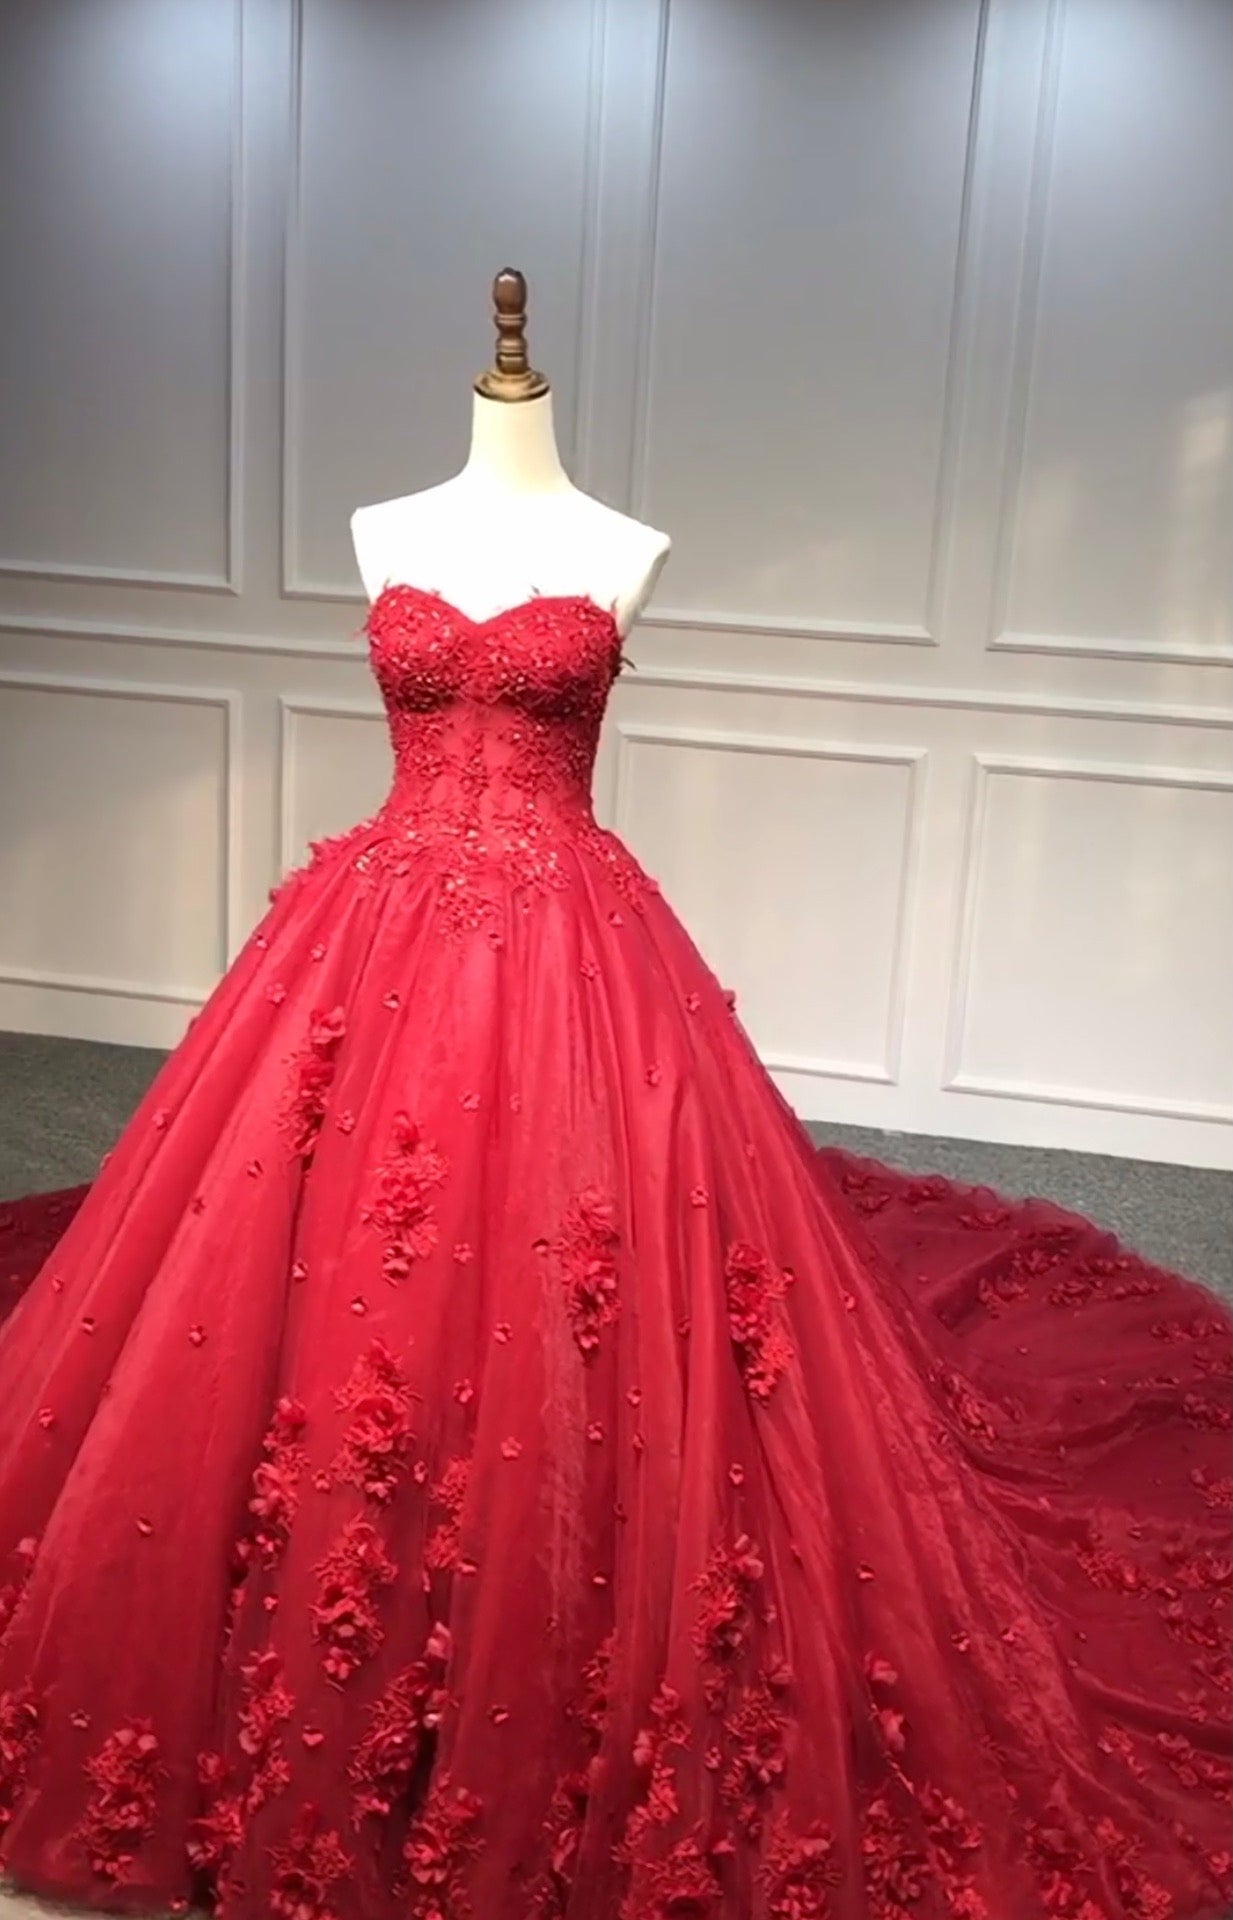 TRADITIONAL RED BRIDAL LONG TRAIL GOWN WITH EMBELLISHMENT -